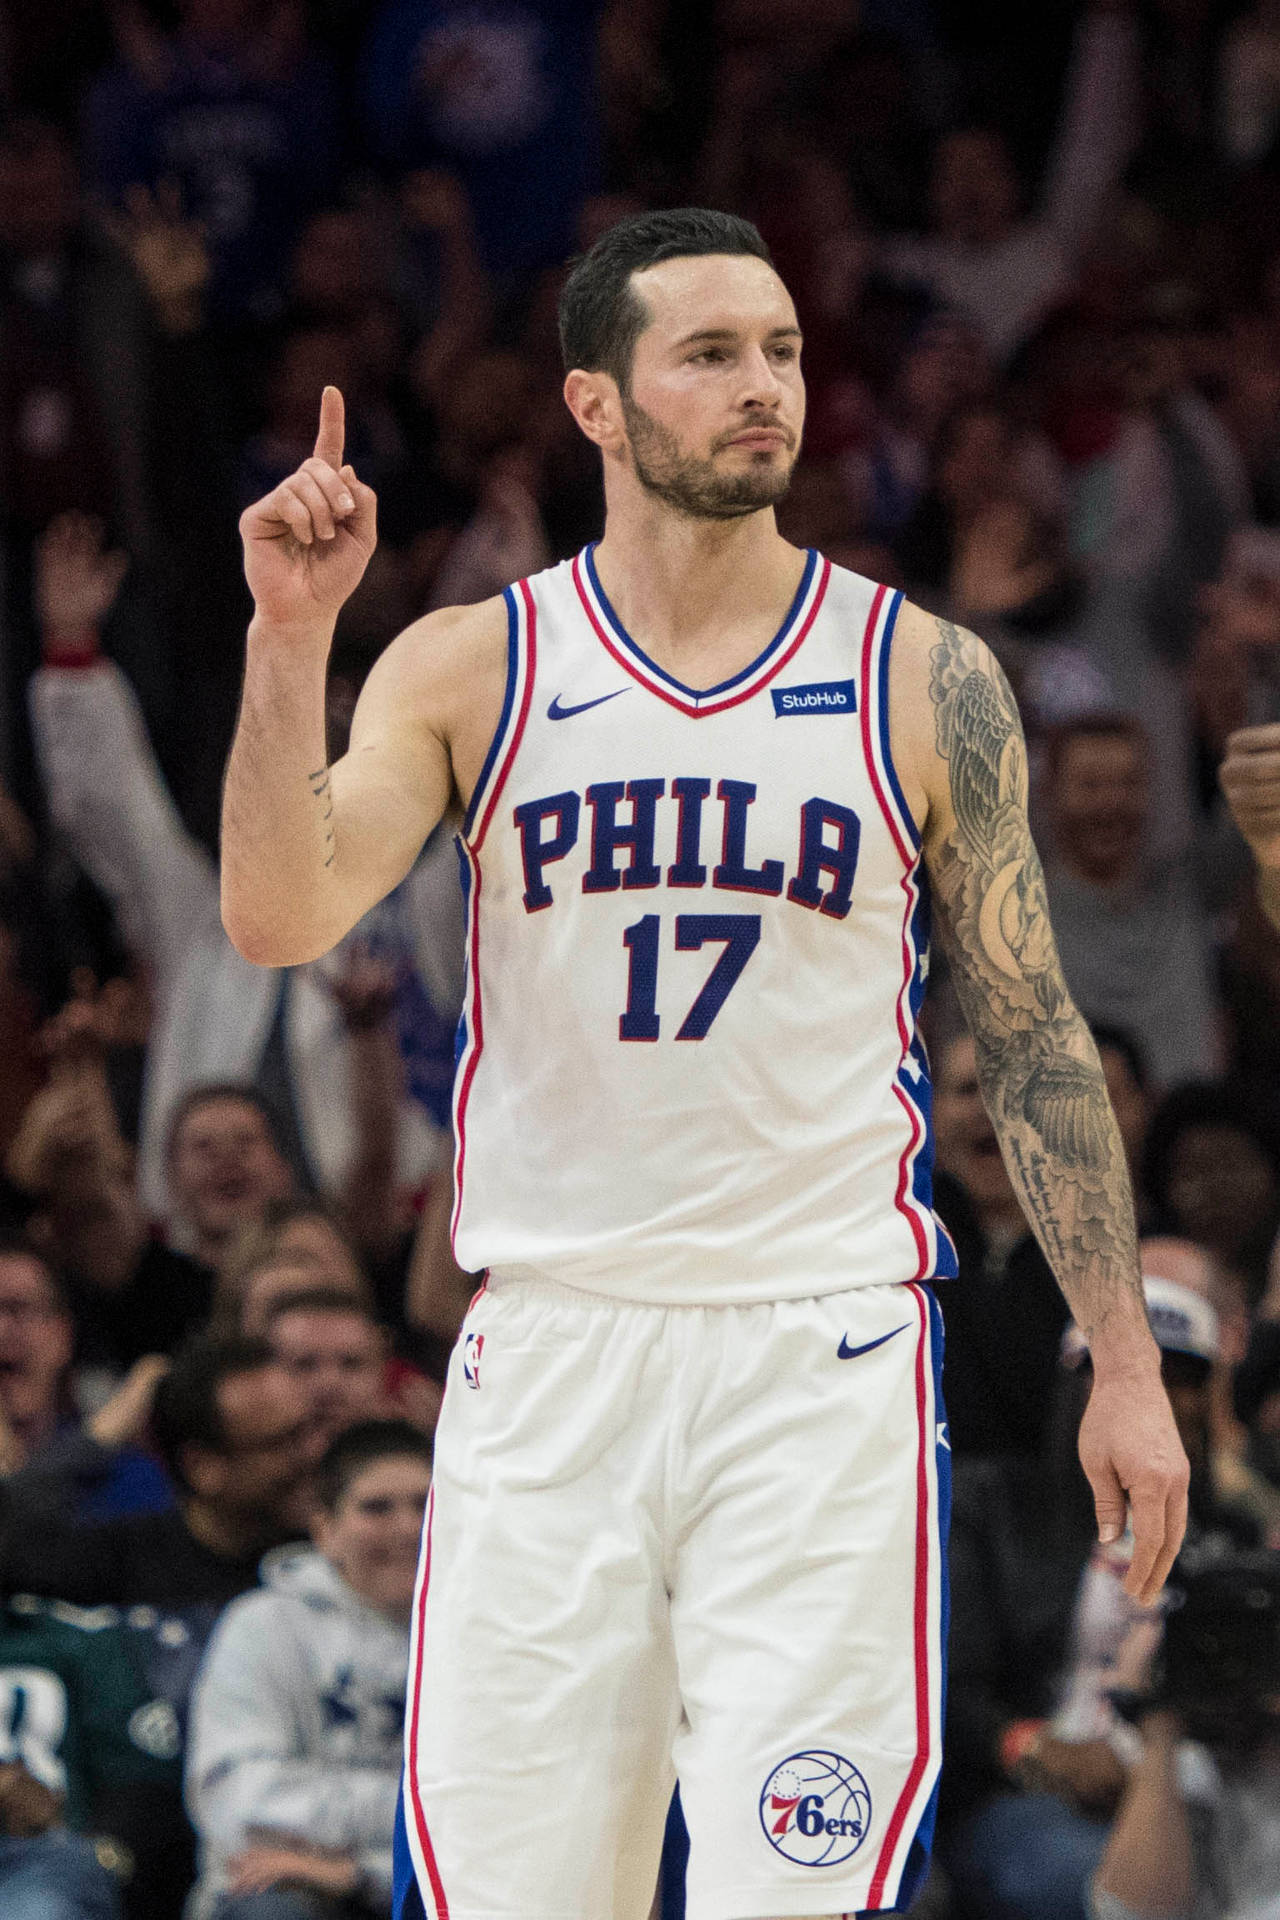 Jj Redick While Pointing Above Background